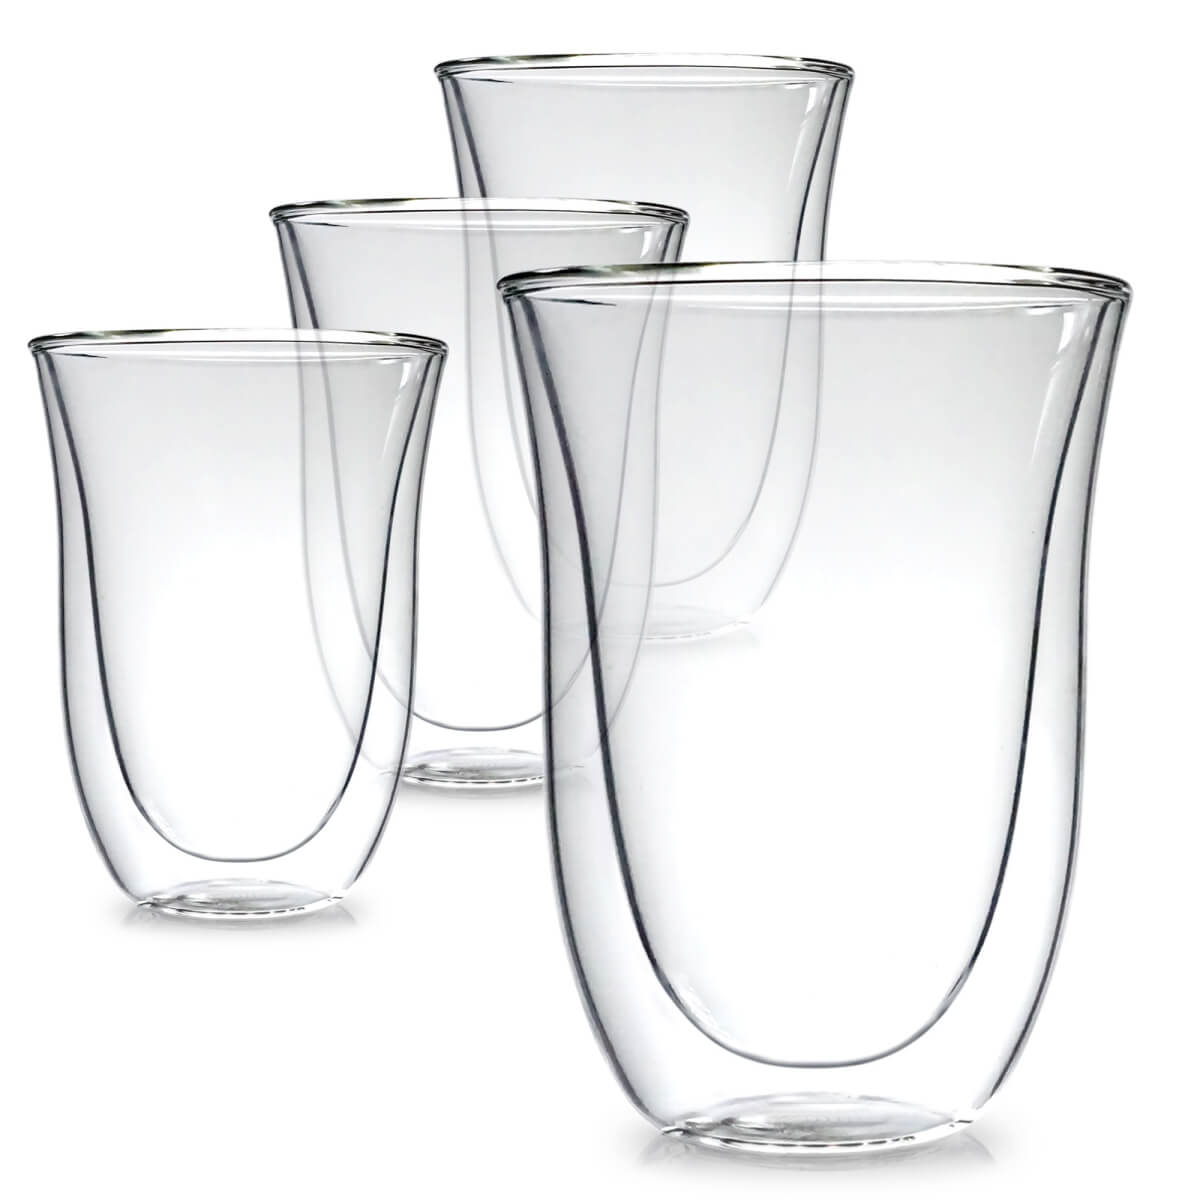 12 oz Double Walled Glasses - Kitchables